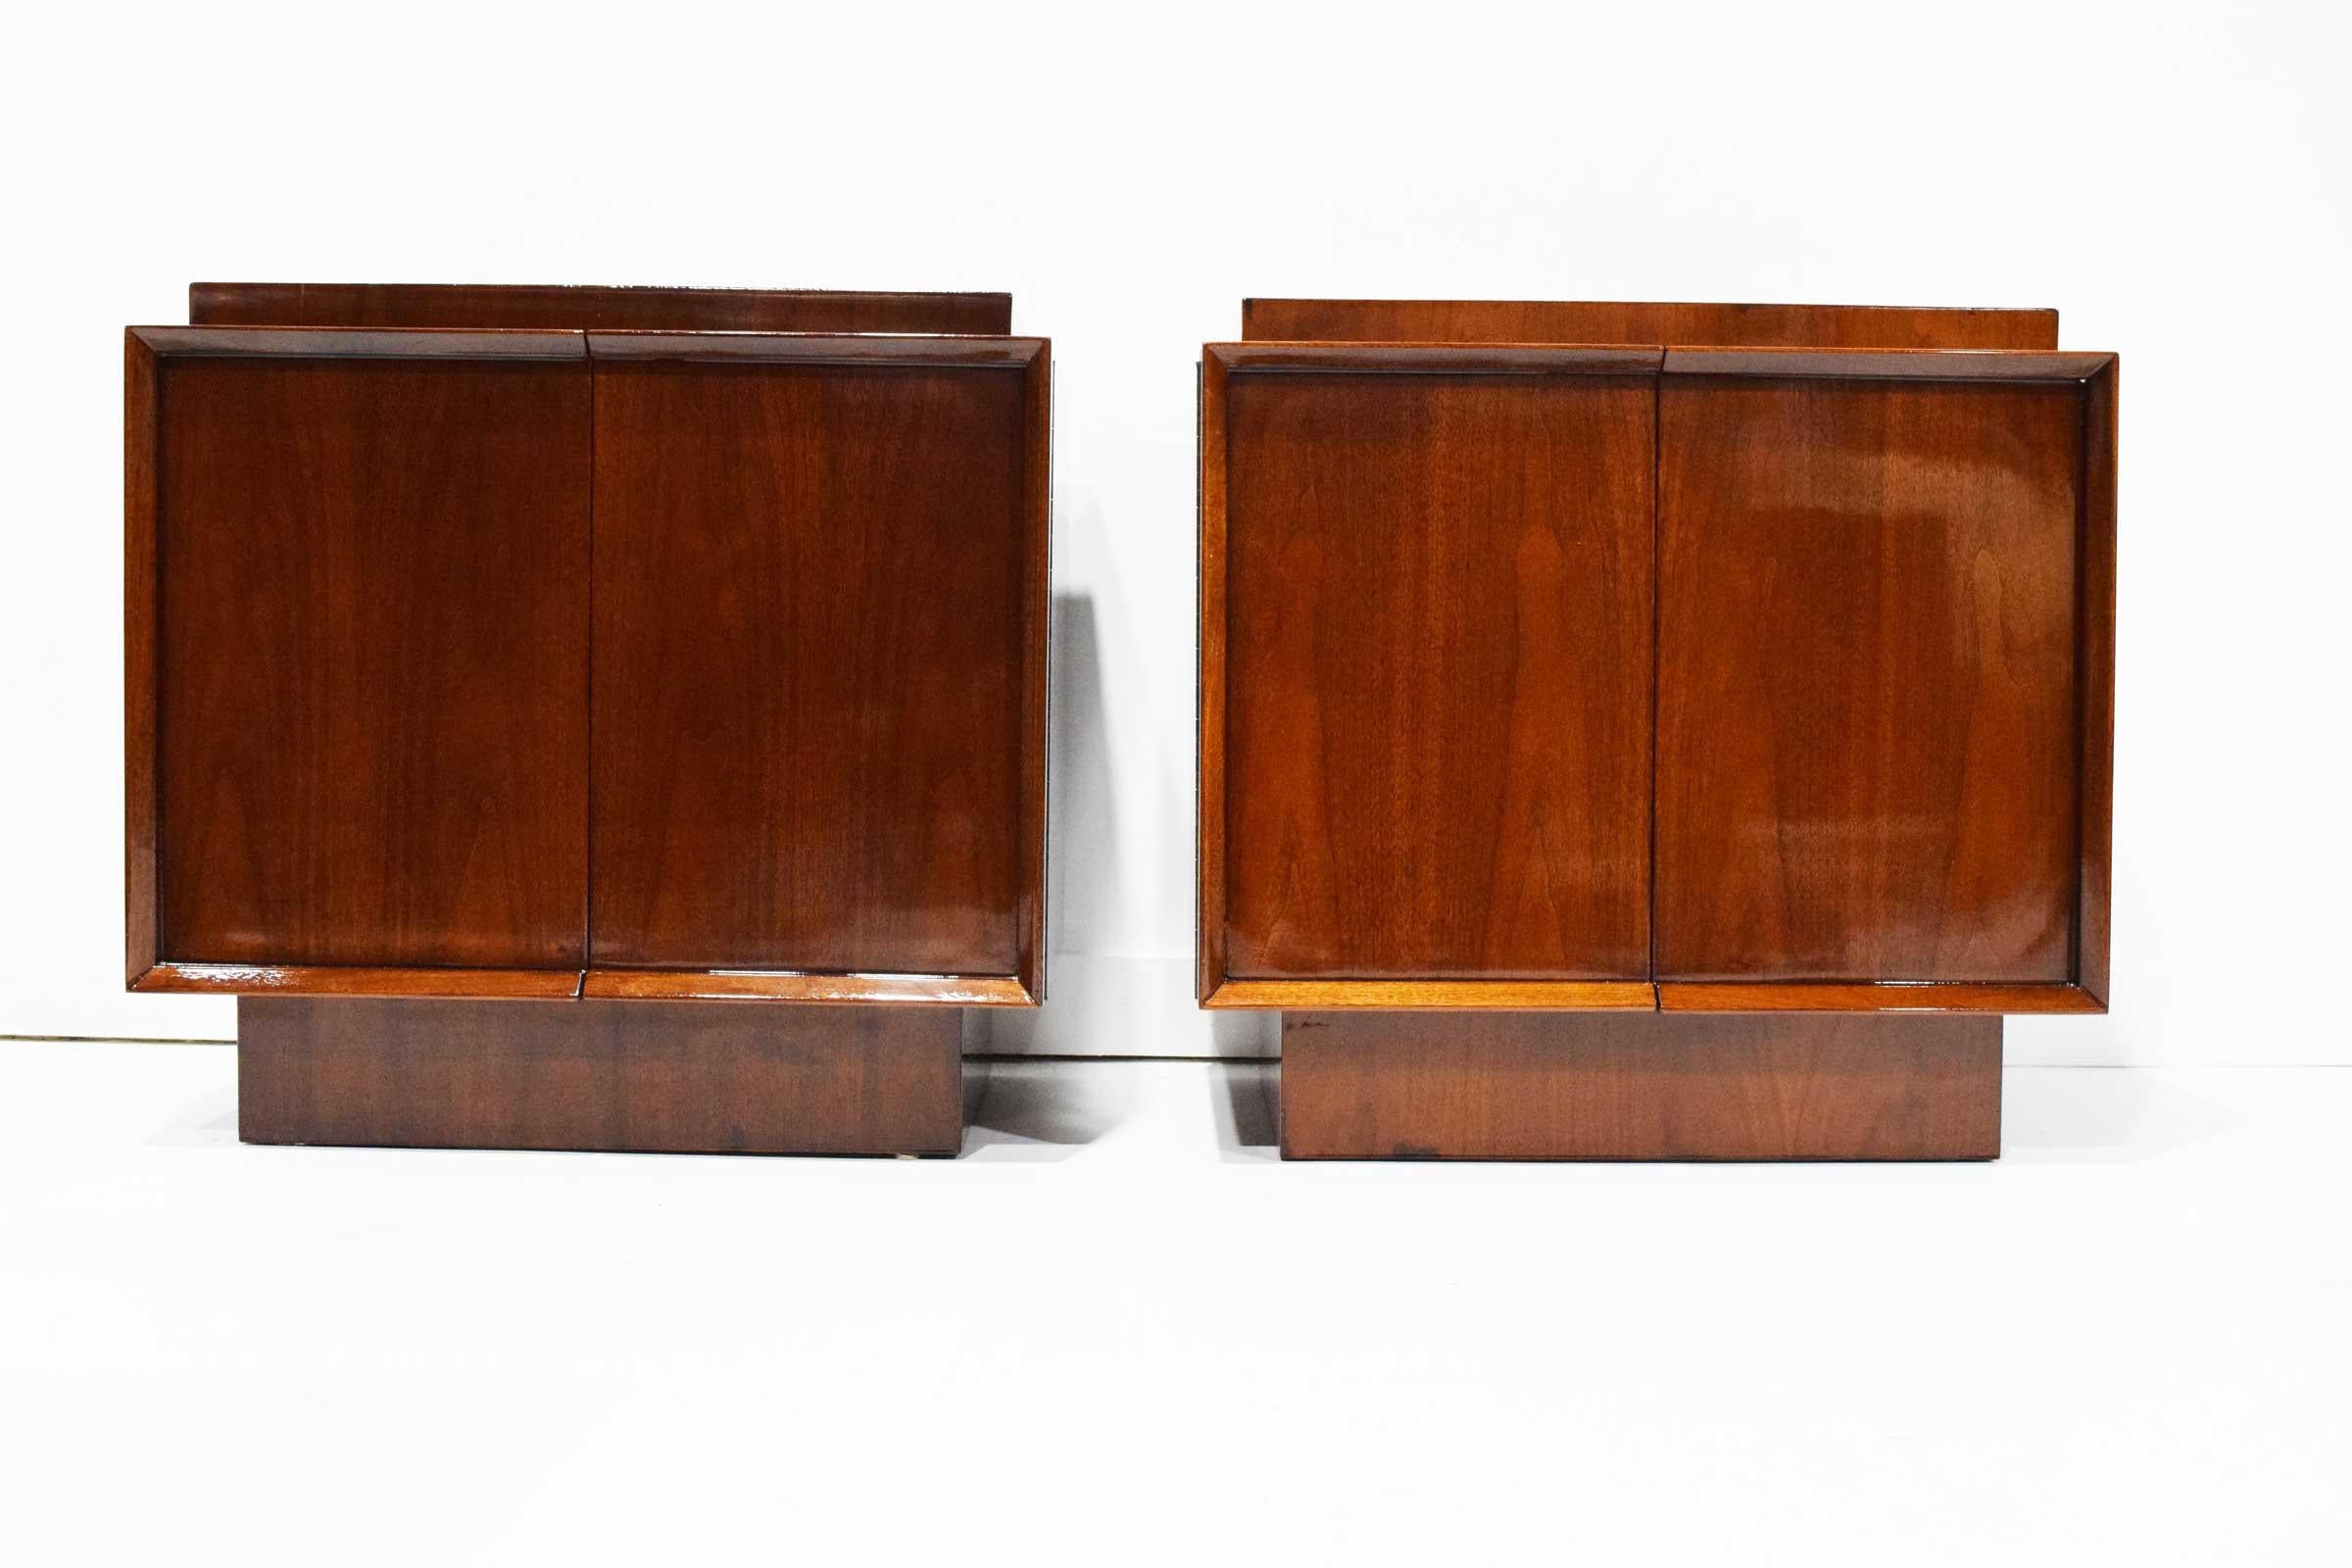 20th Century Pair of Art Deco Style Nightstands in Mahogany